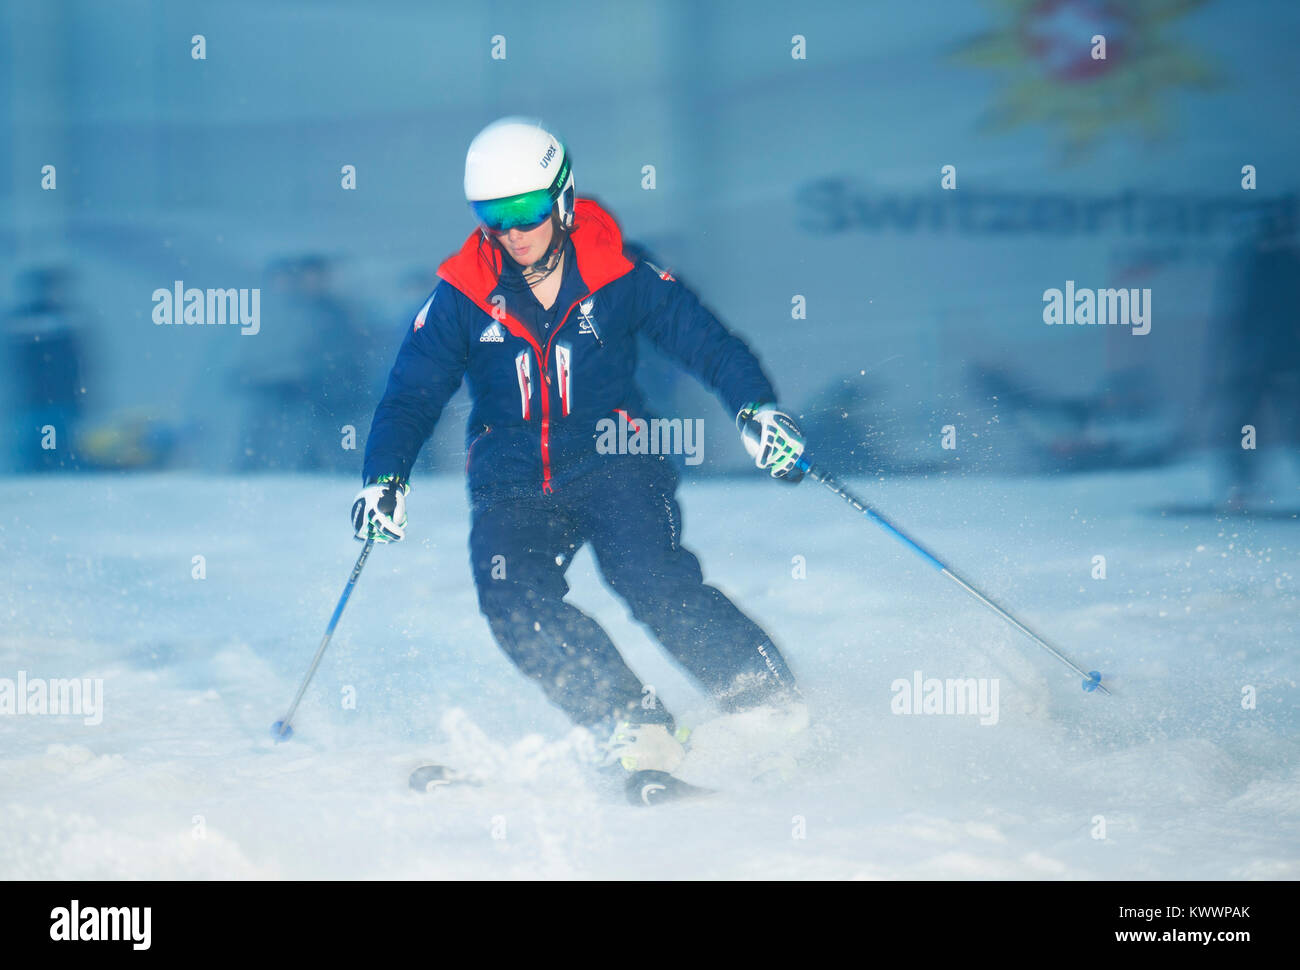 ParalympicsGB skier Millie Knight during the ParalympicsGB 2018 Winter Olympics Alpine Skiing and Snowboard team announcement, at The Snowcentre, Hemel Hempstead. Stock Photo